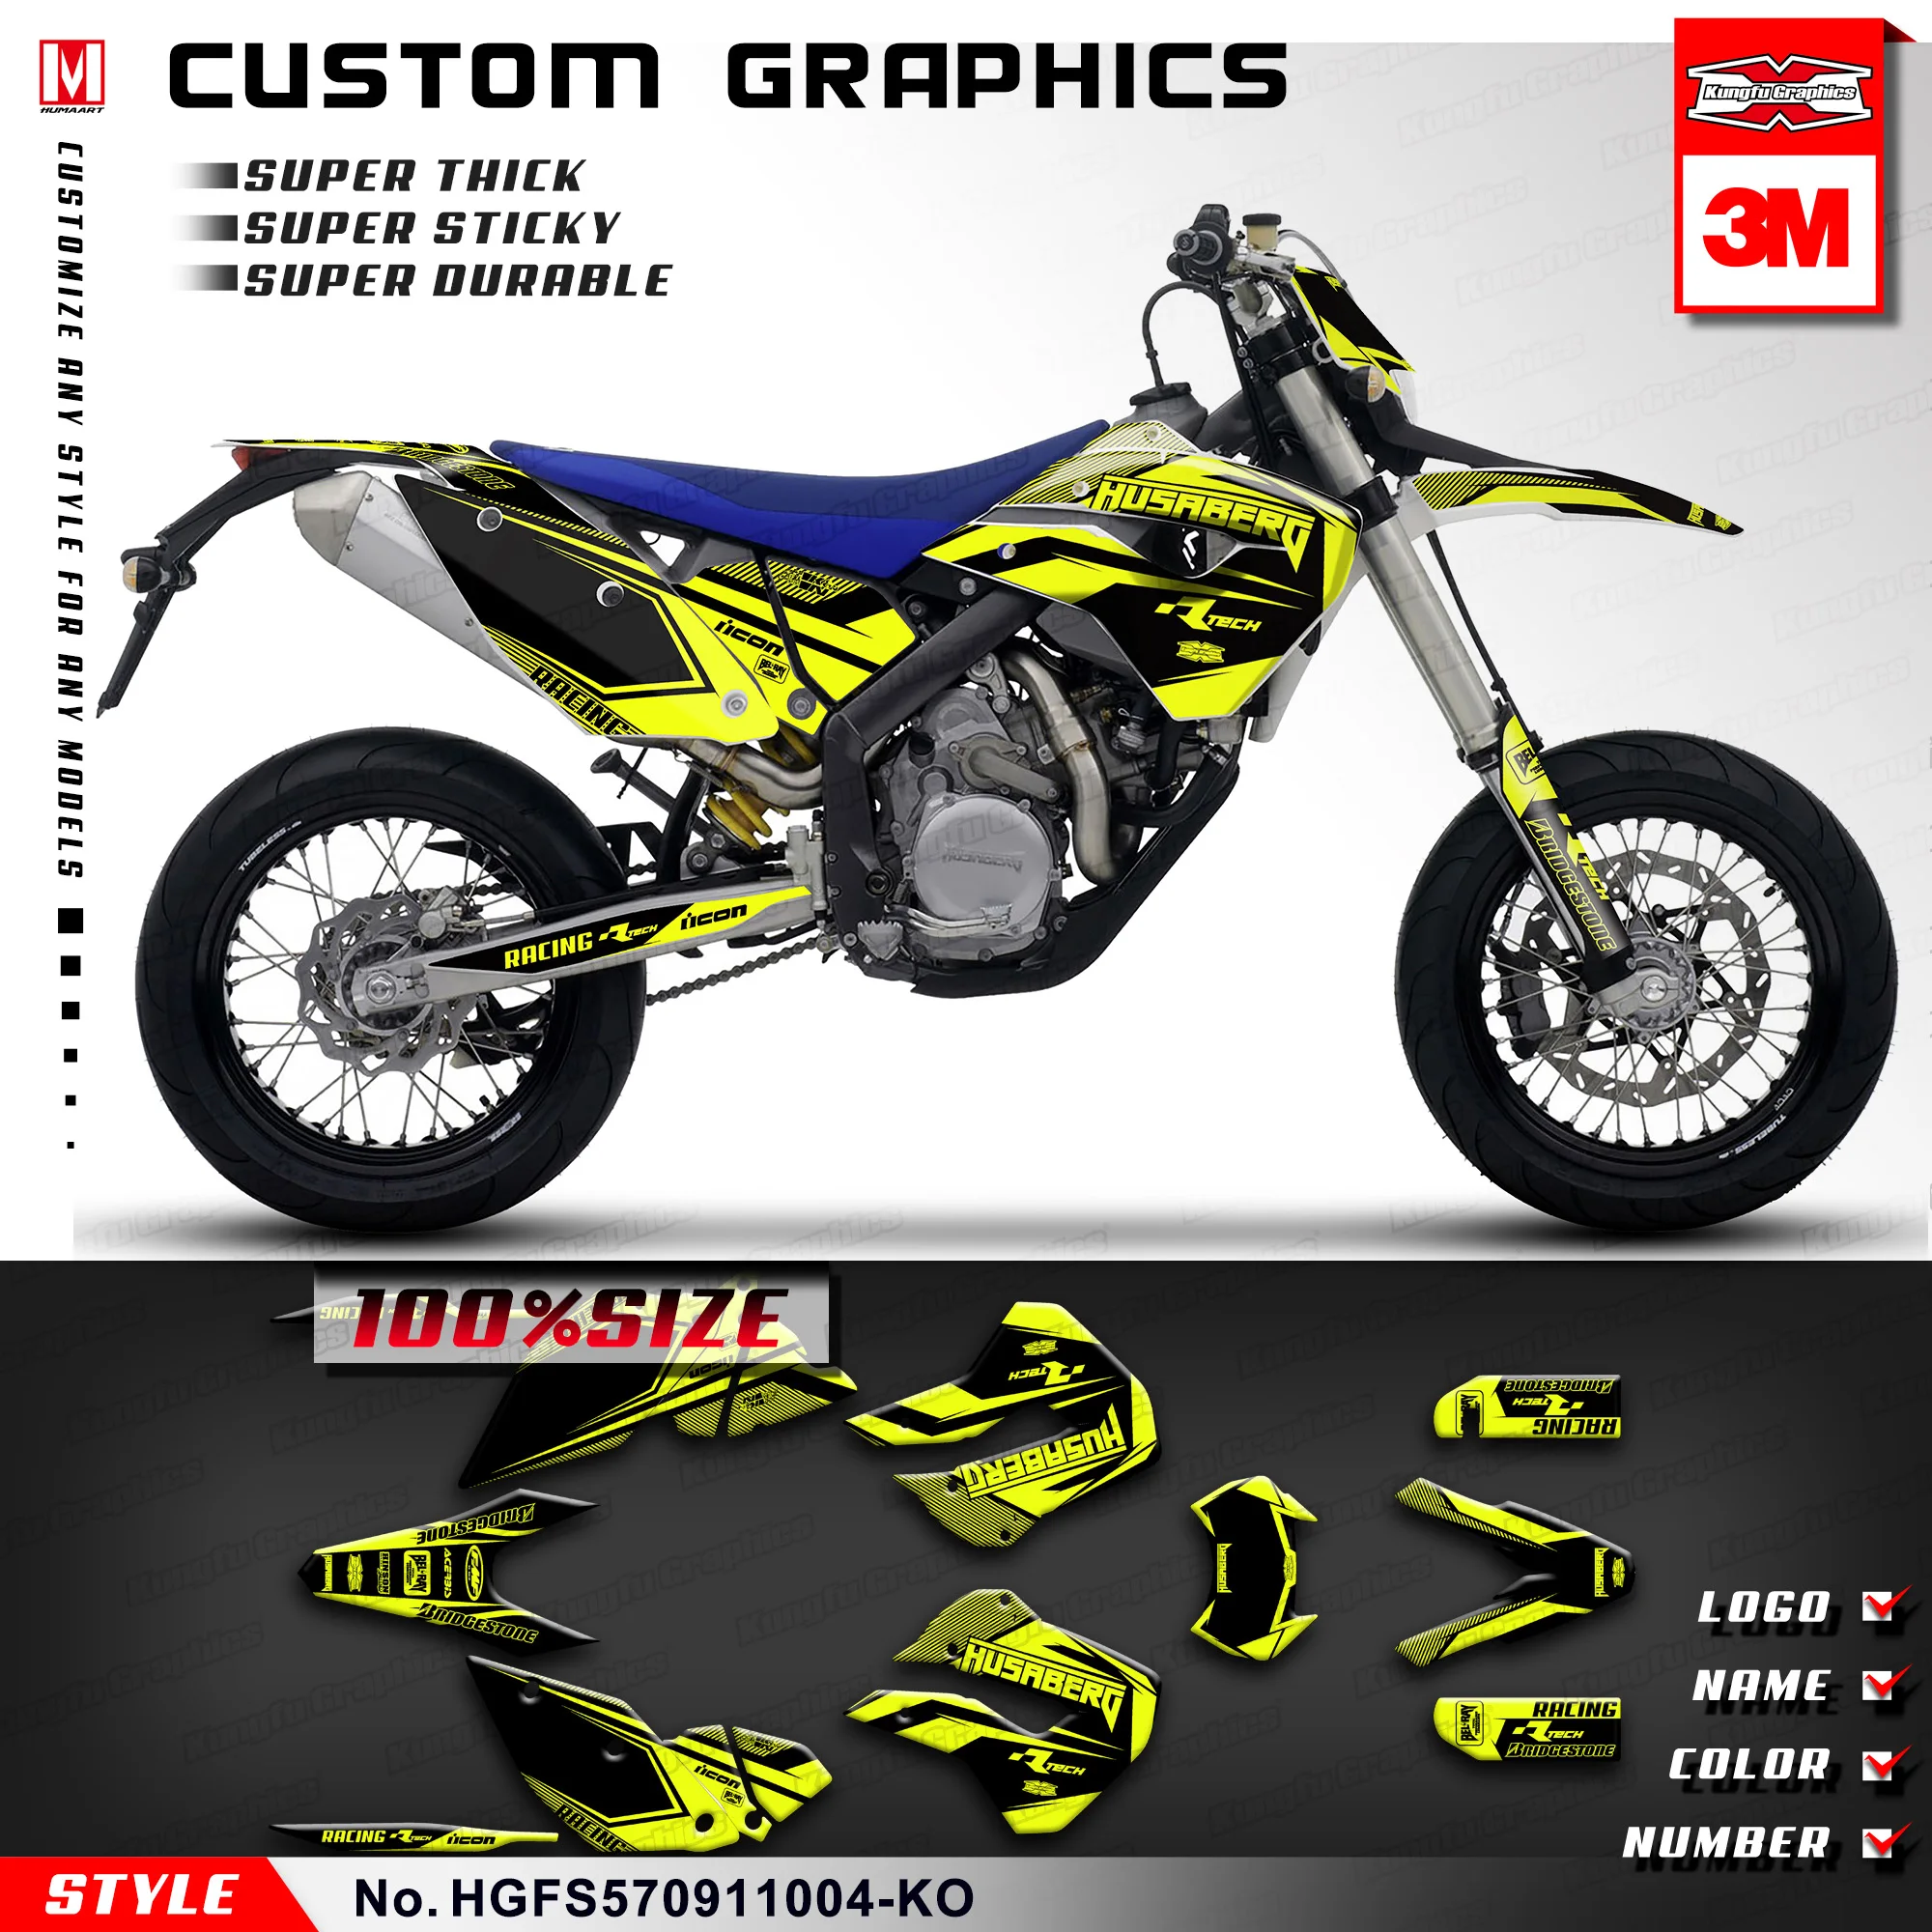 KUNGFU GRAPHICS Personalised Stickers Motocross Decals for Husaberg FE 390 450 570 FE390 FE450 FE570 2009 2010 2011 2012 Black